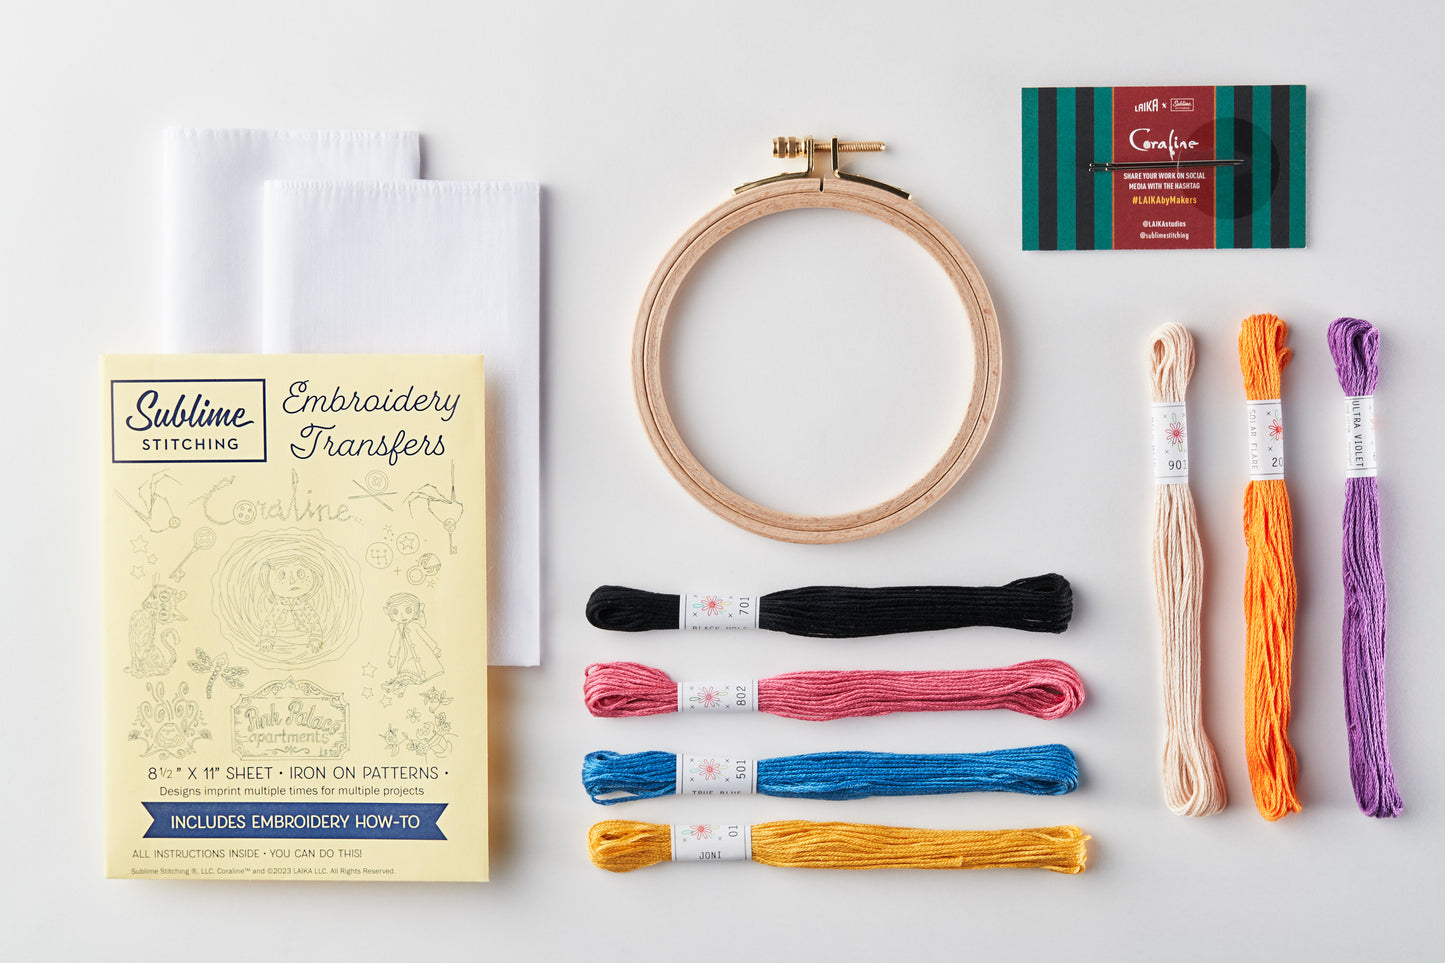 Coraline Embroidery Kit